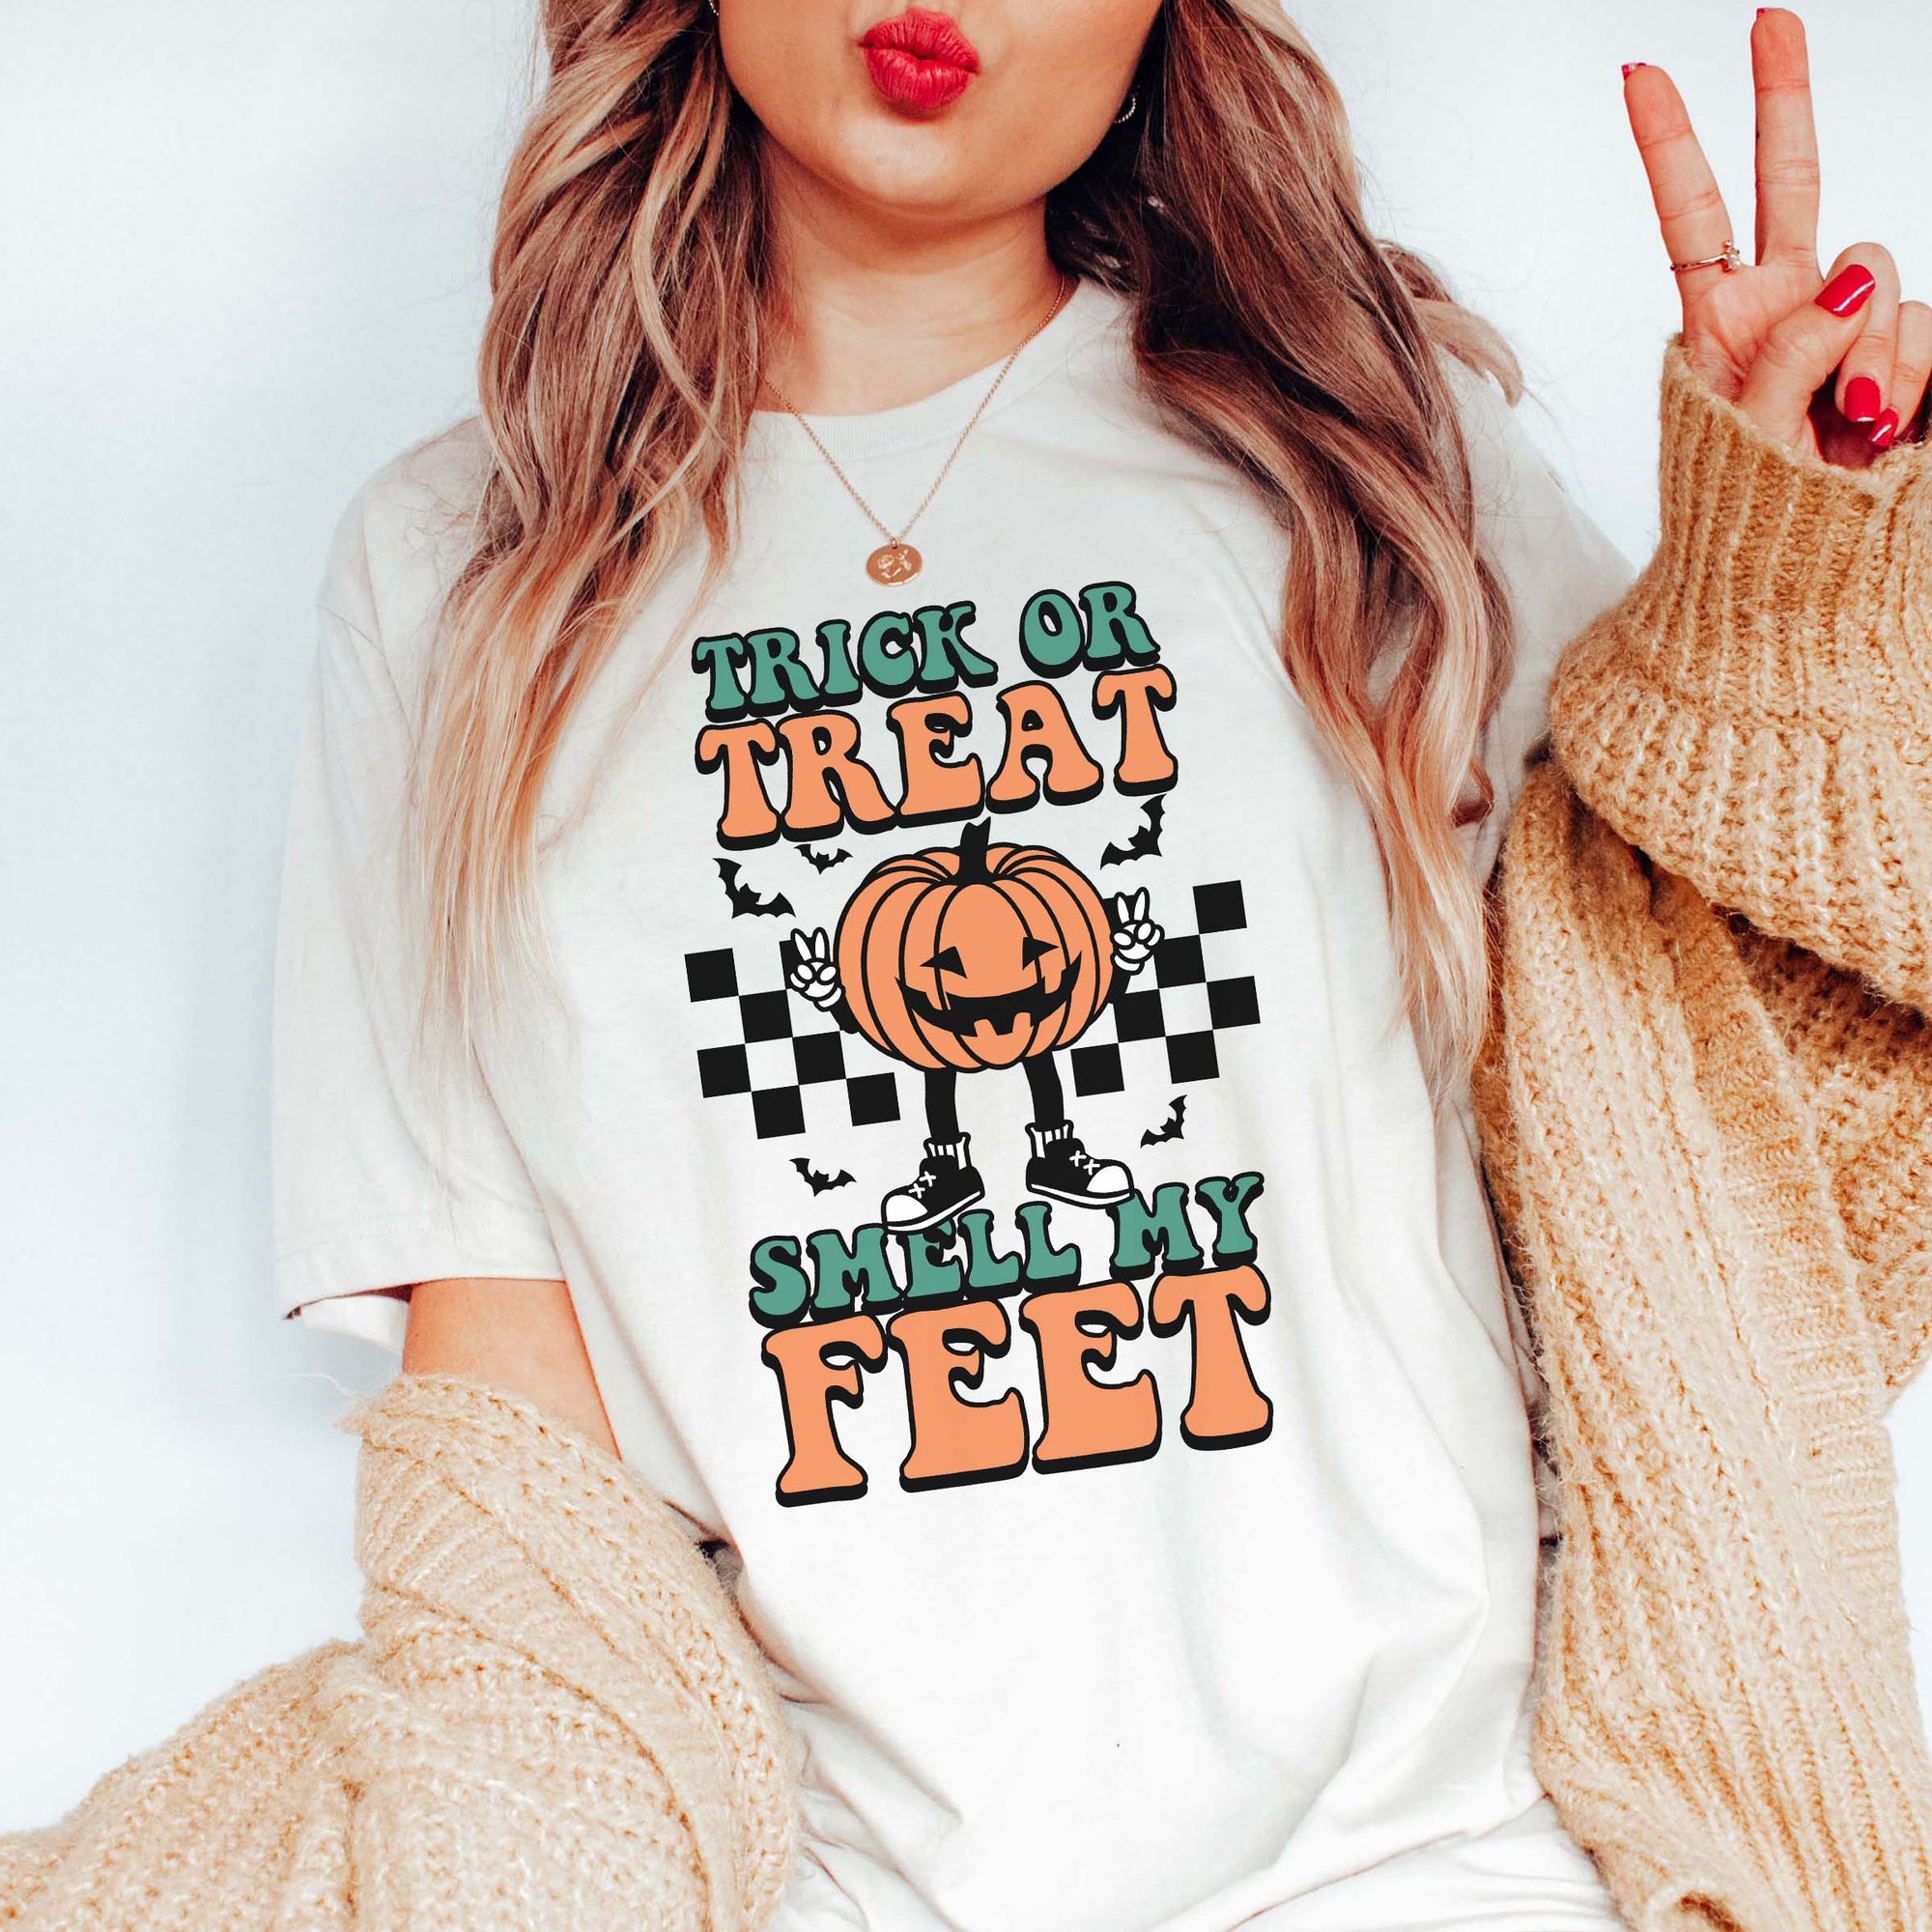 Trick or Treat Smell My Feet Tee